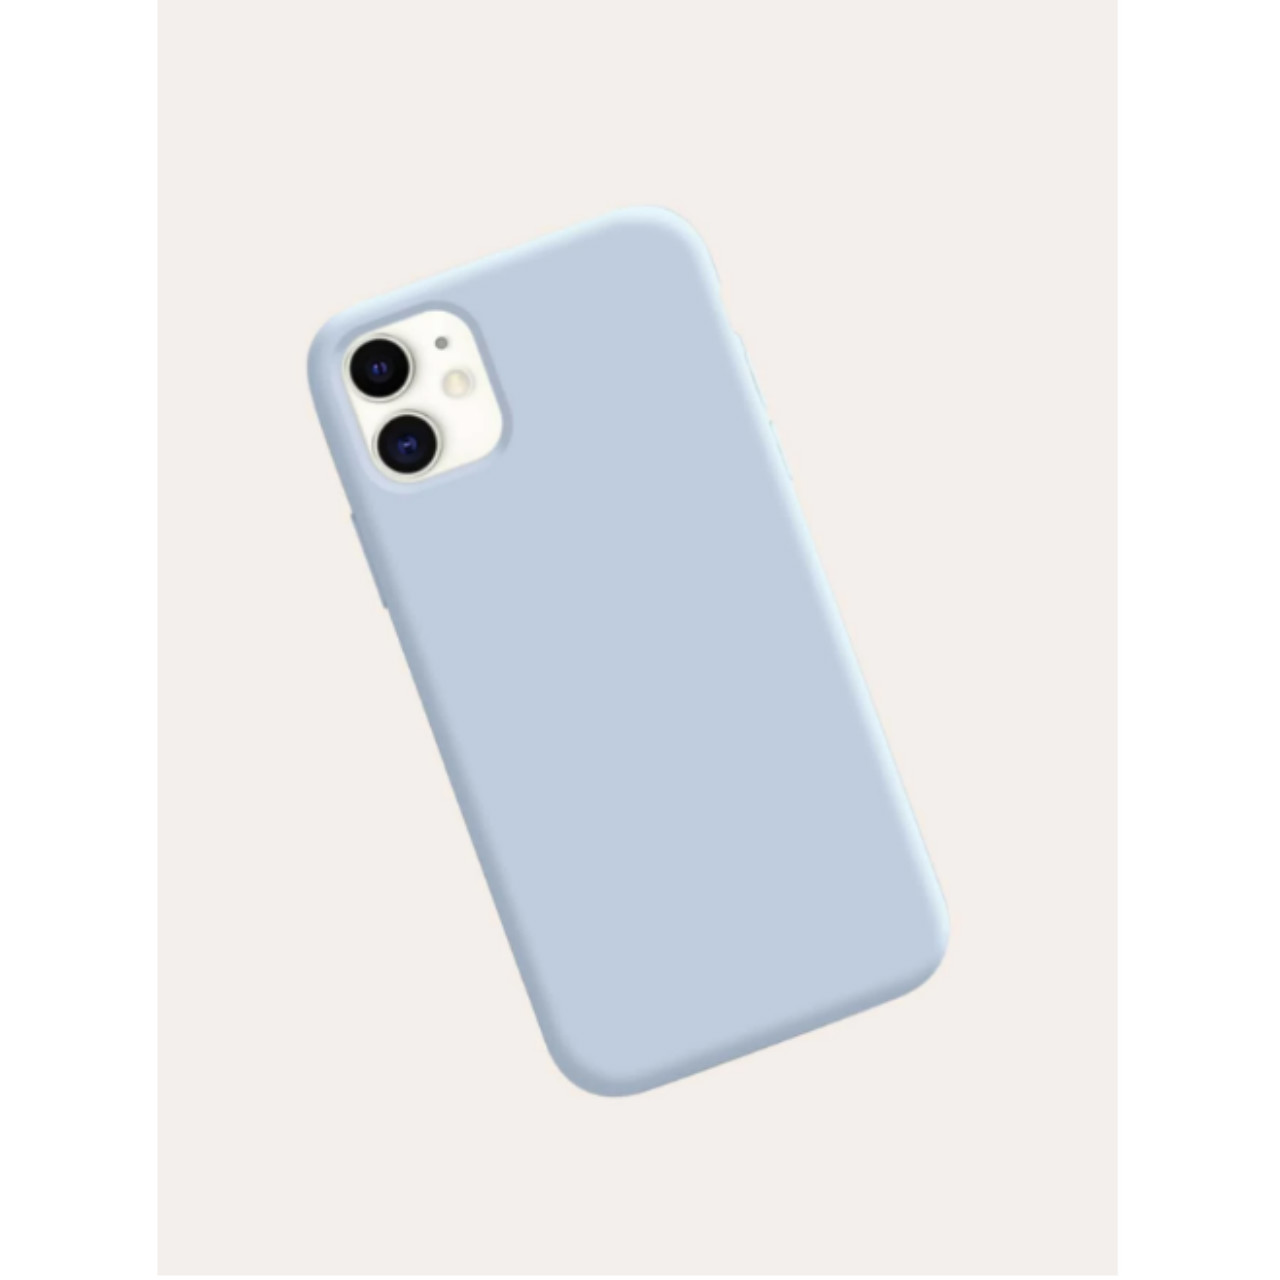 1pc solid iphone case 7/8